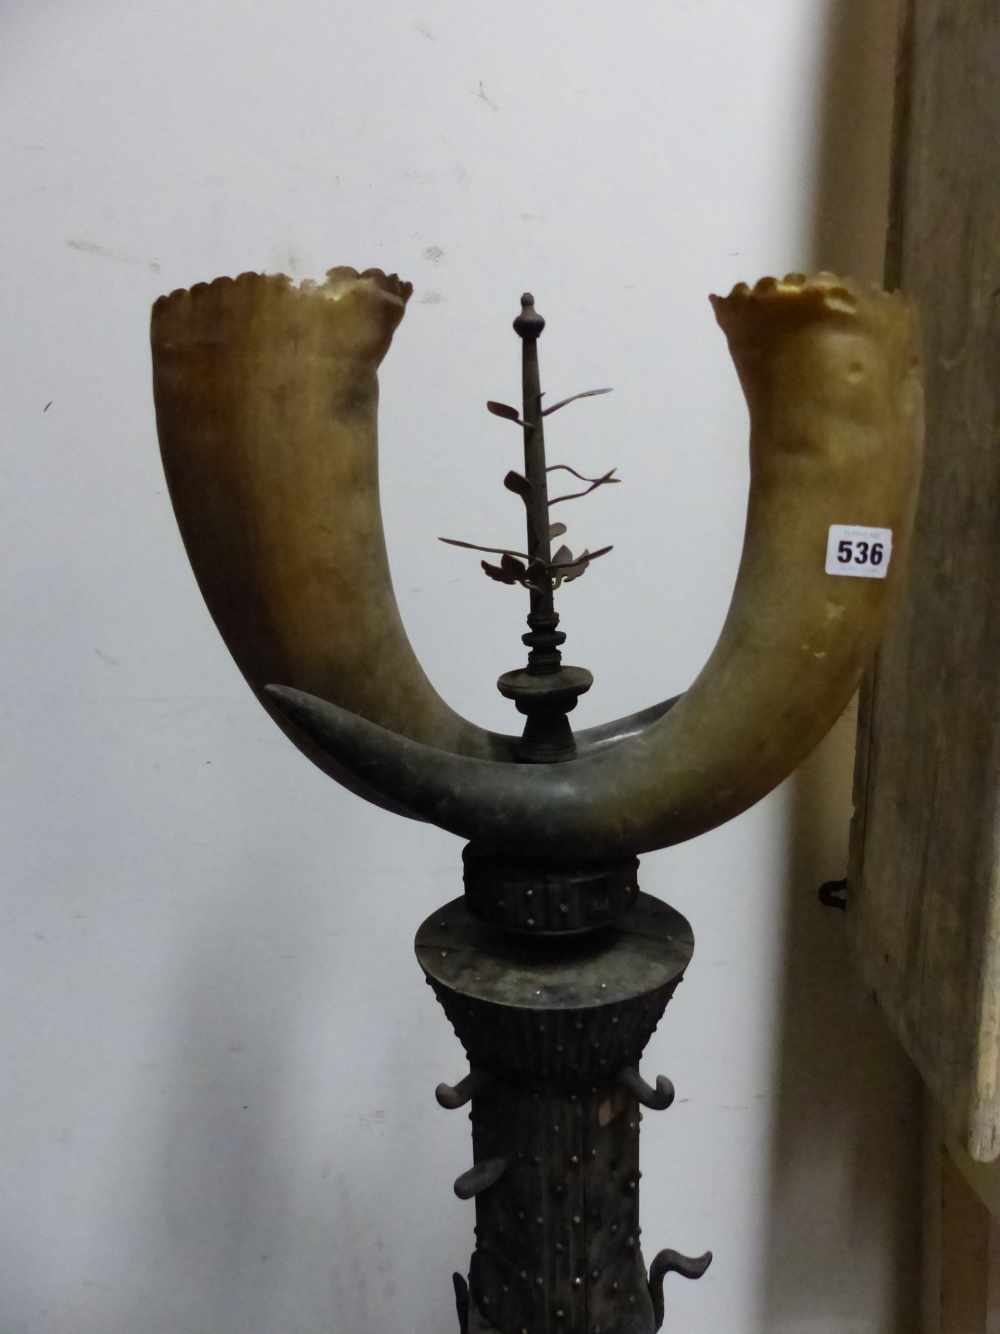 AN UNUSUAL EASTERN, HORN MOUNTED, FLOOR STANDING, CANDLE STAND CENTREPIECE. - Image 3 of 11